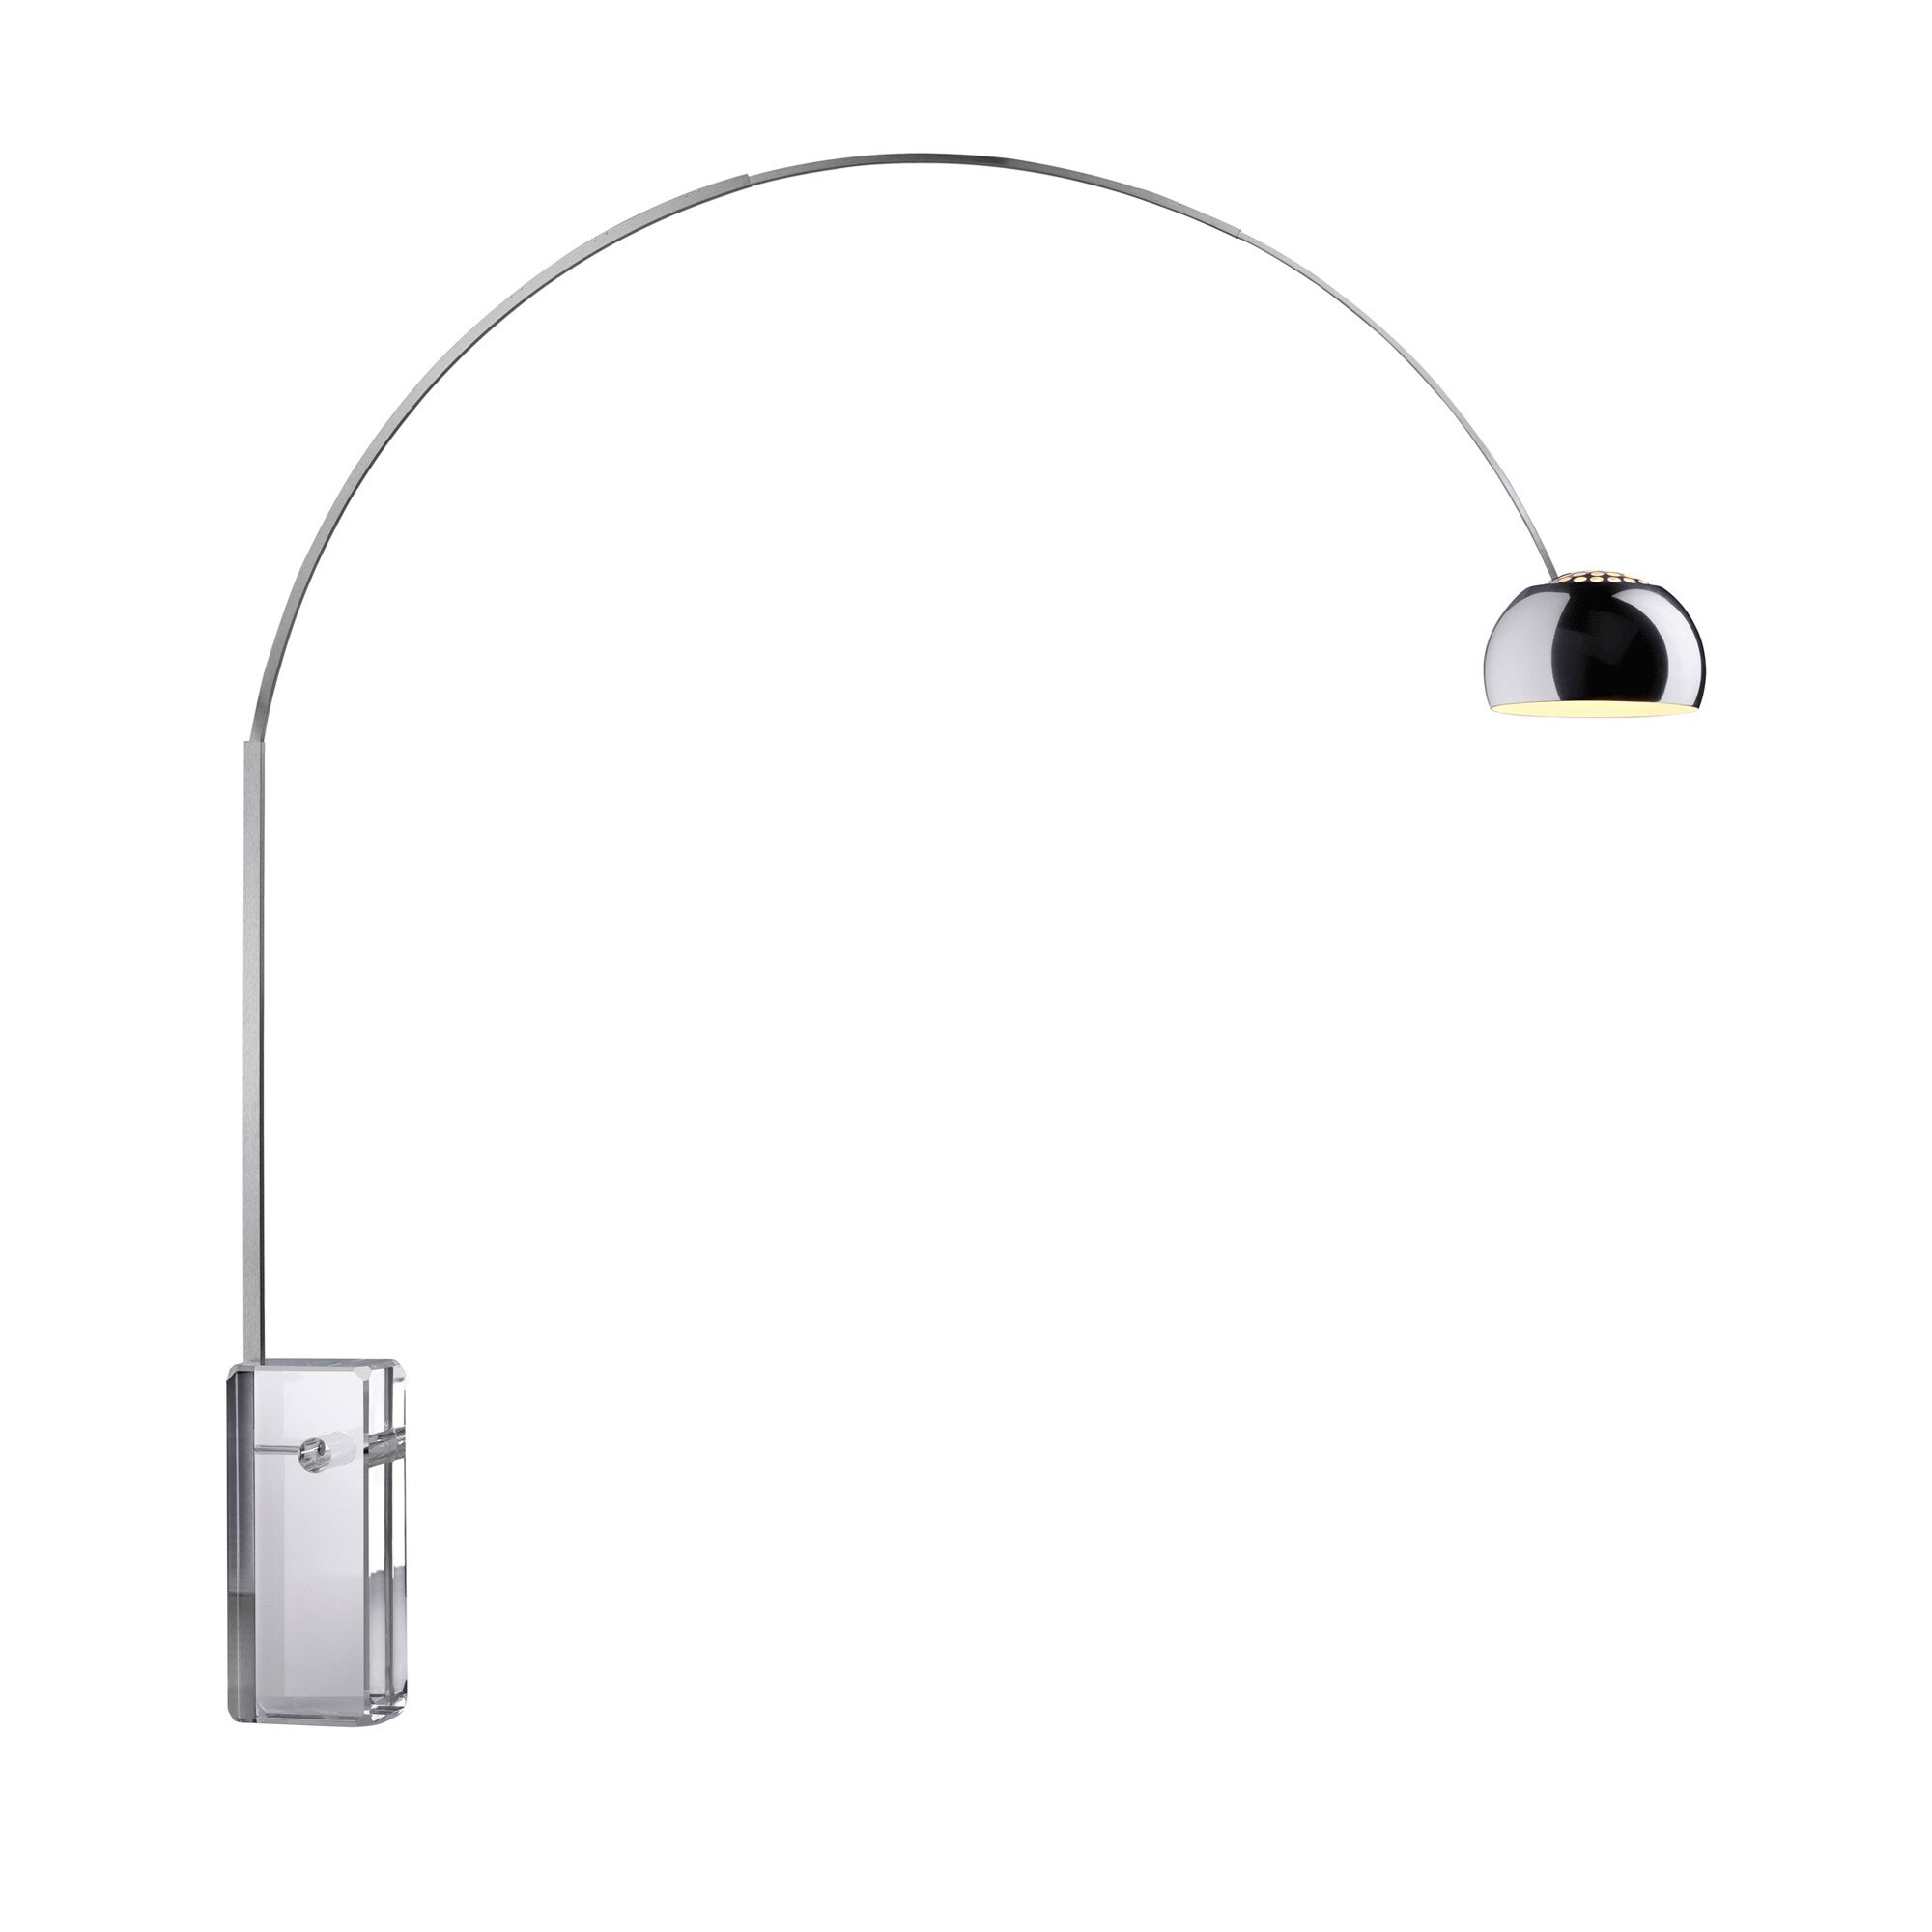 Flos Arco K Stehlampe Glas Limited Edition